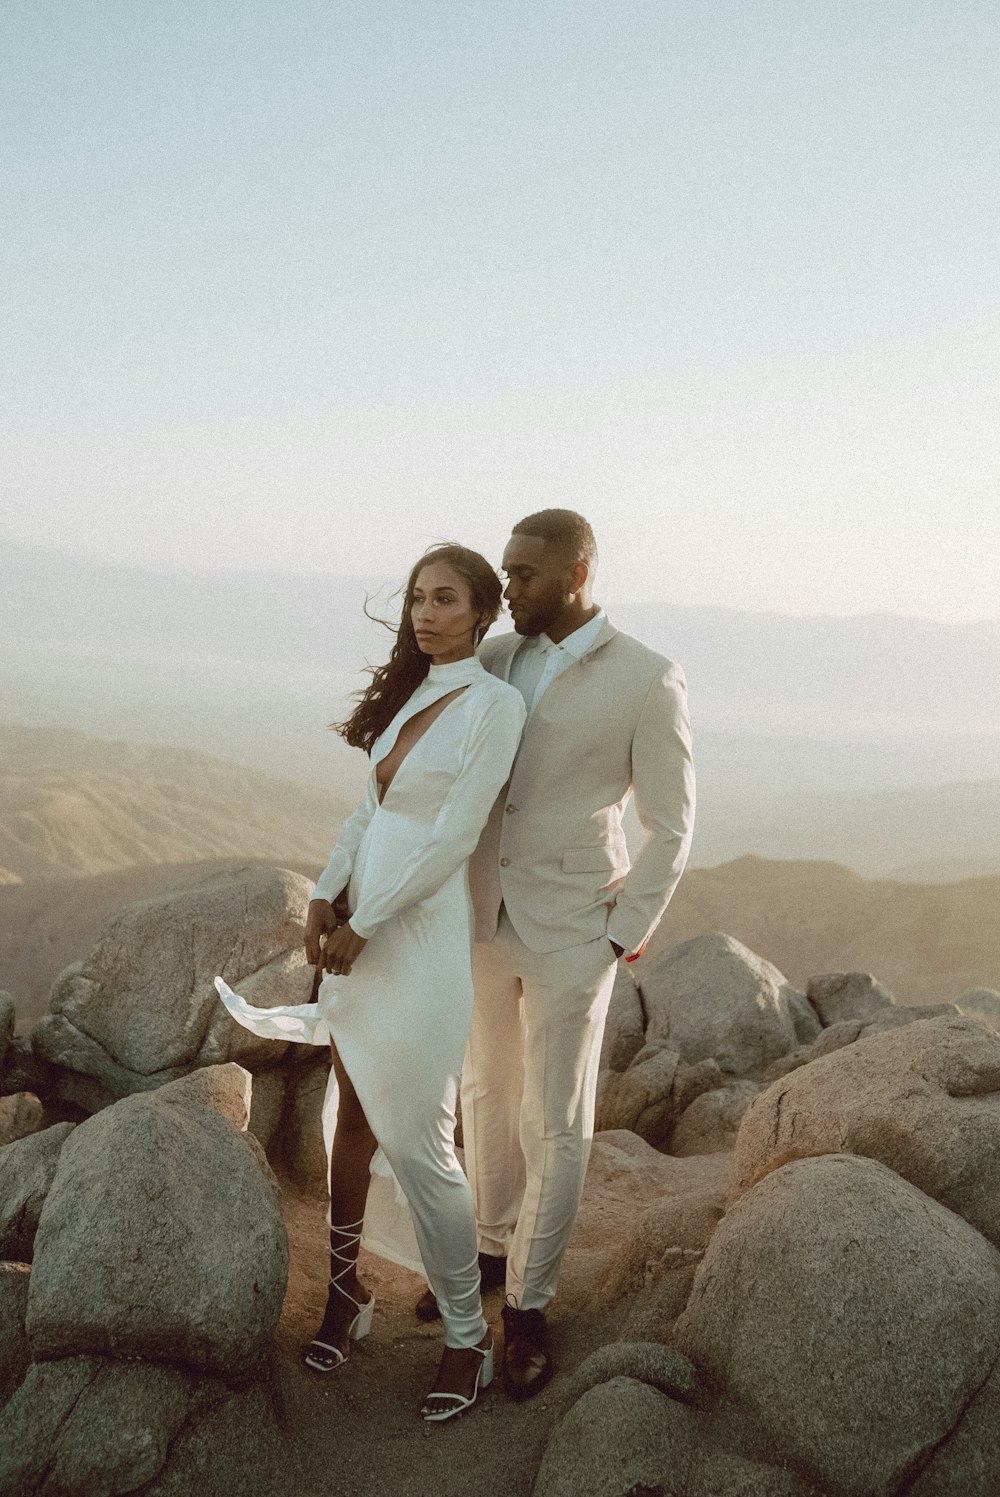 man in white suit standing beside woman in white dress on rock during daytime